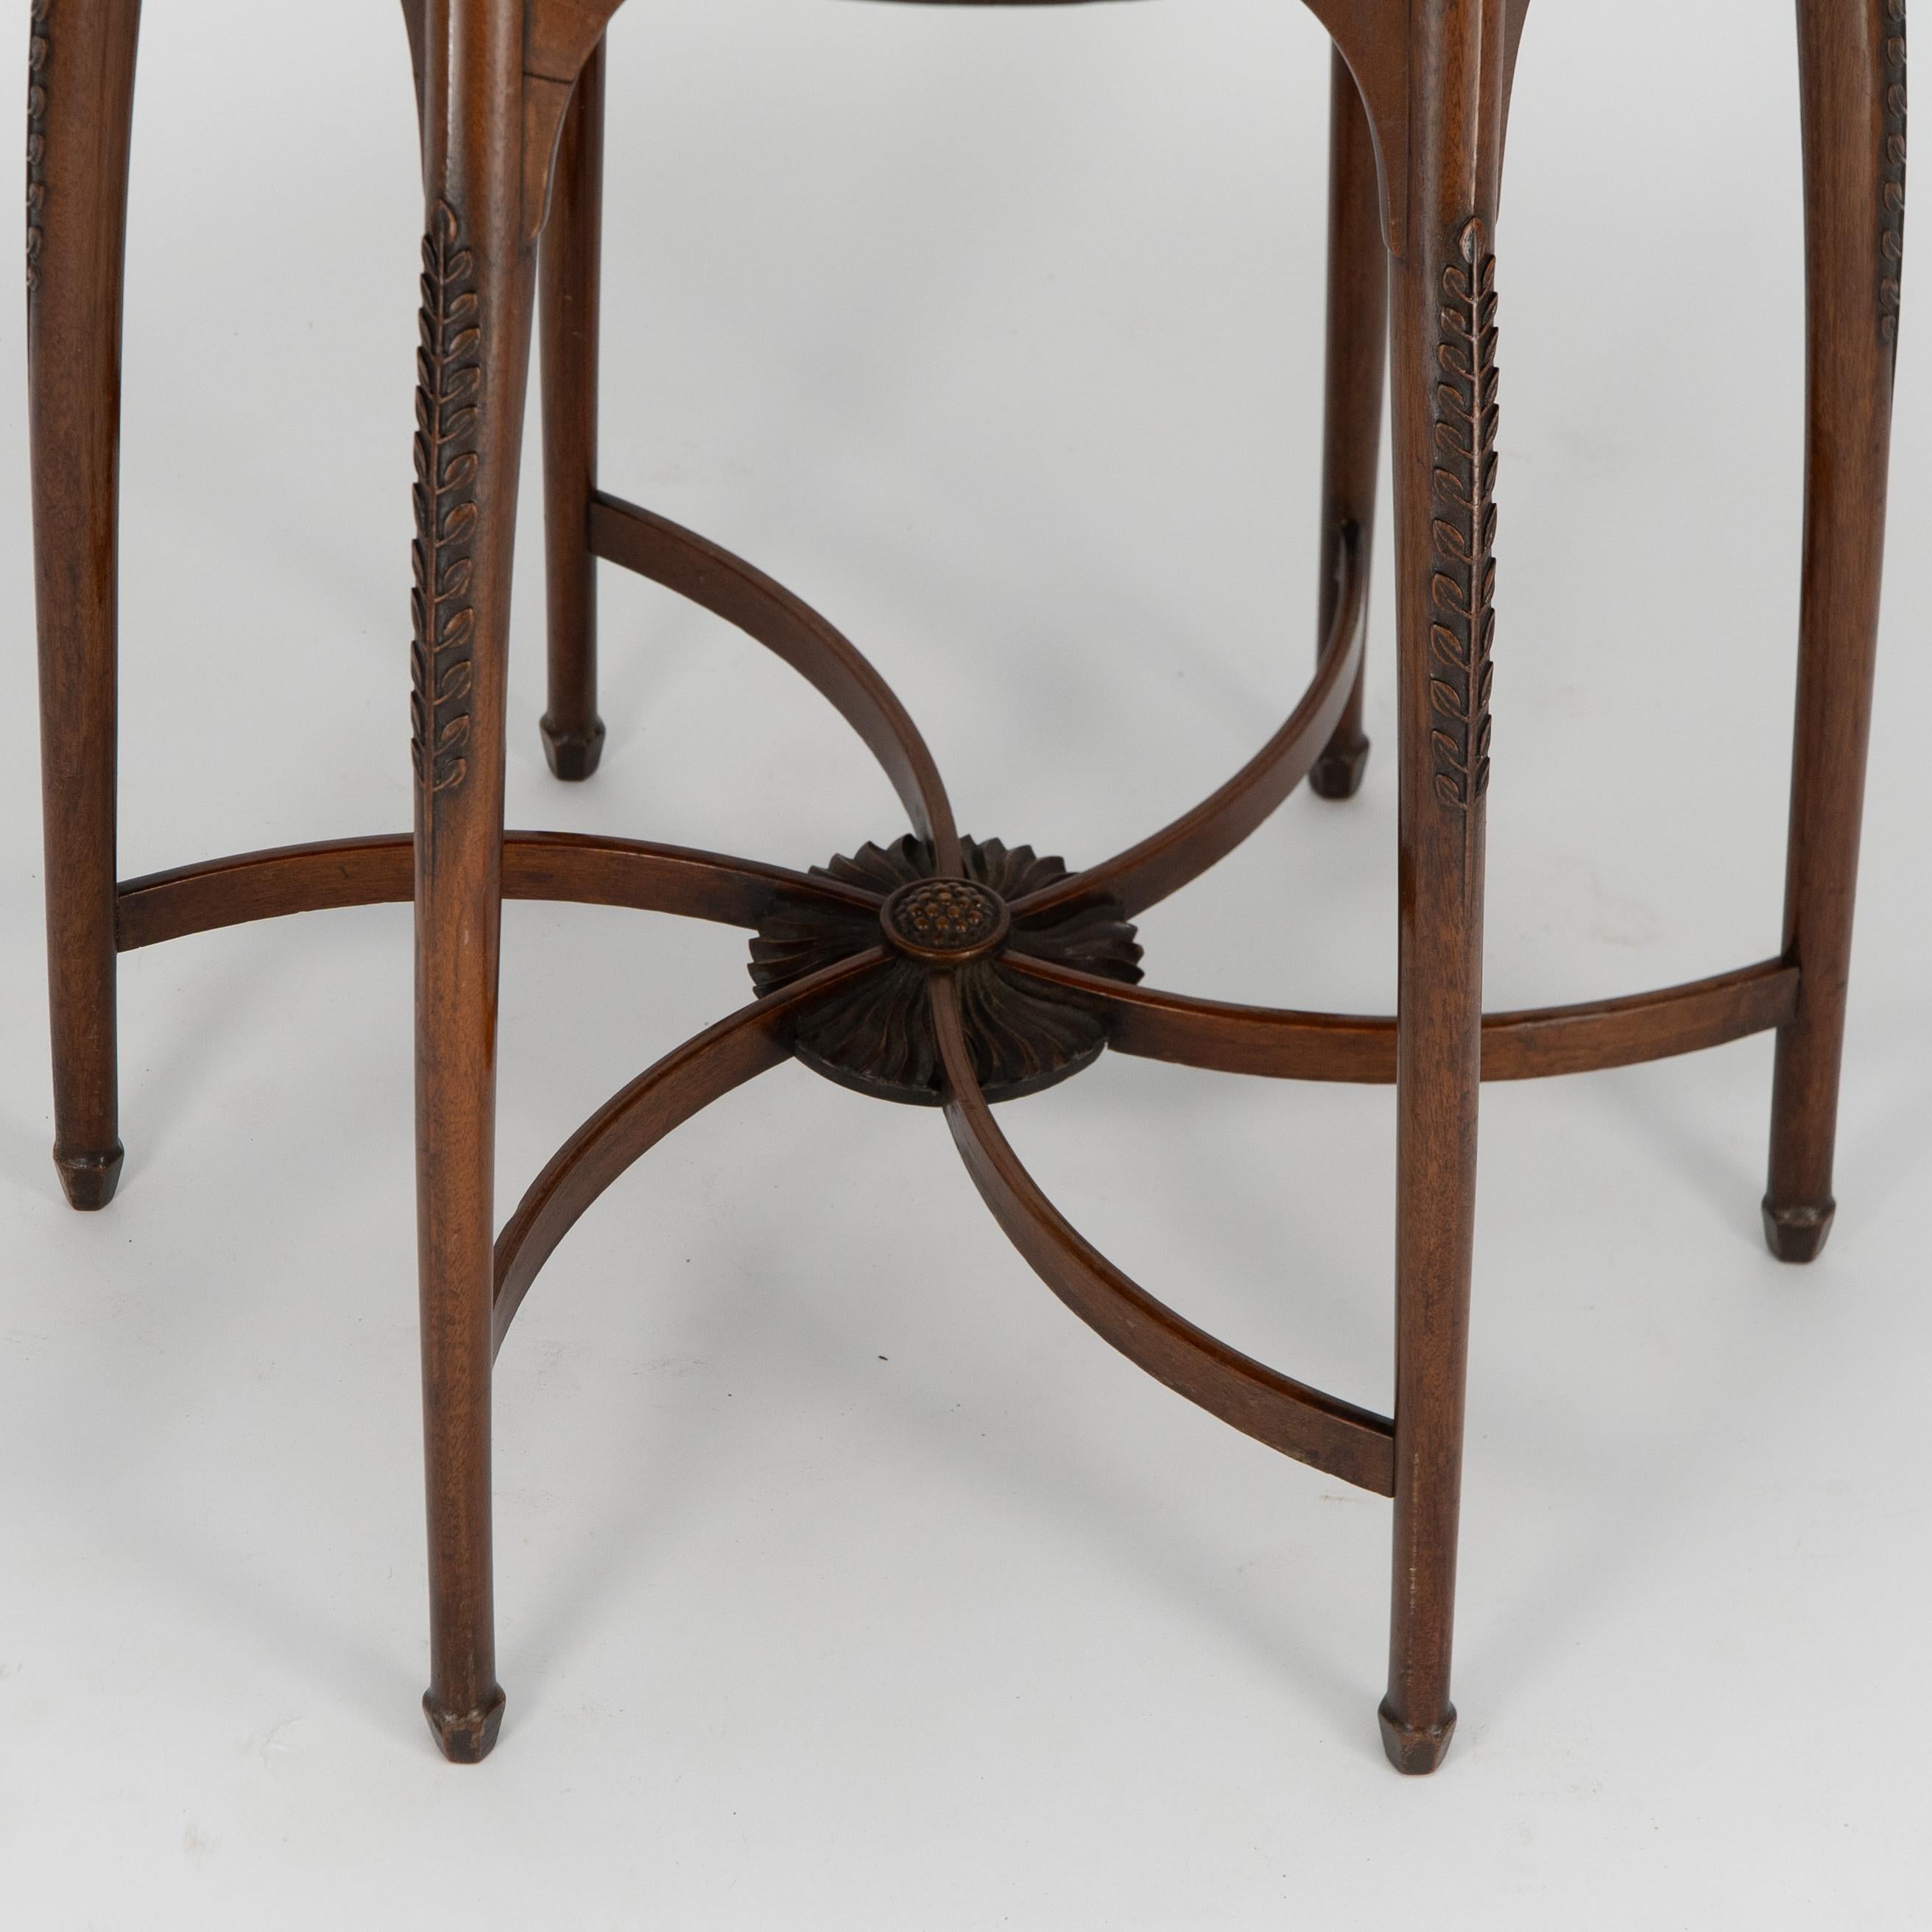 George Jack for Morris and Co. A high Aesthetic Movement circular side table For Sale 2